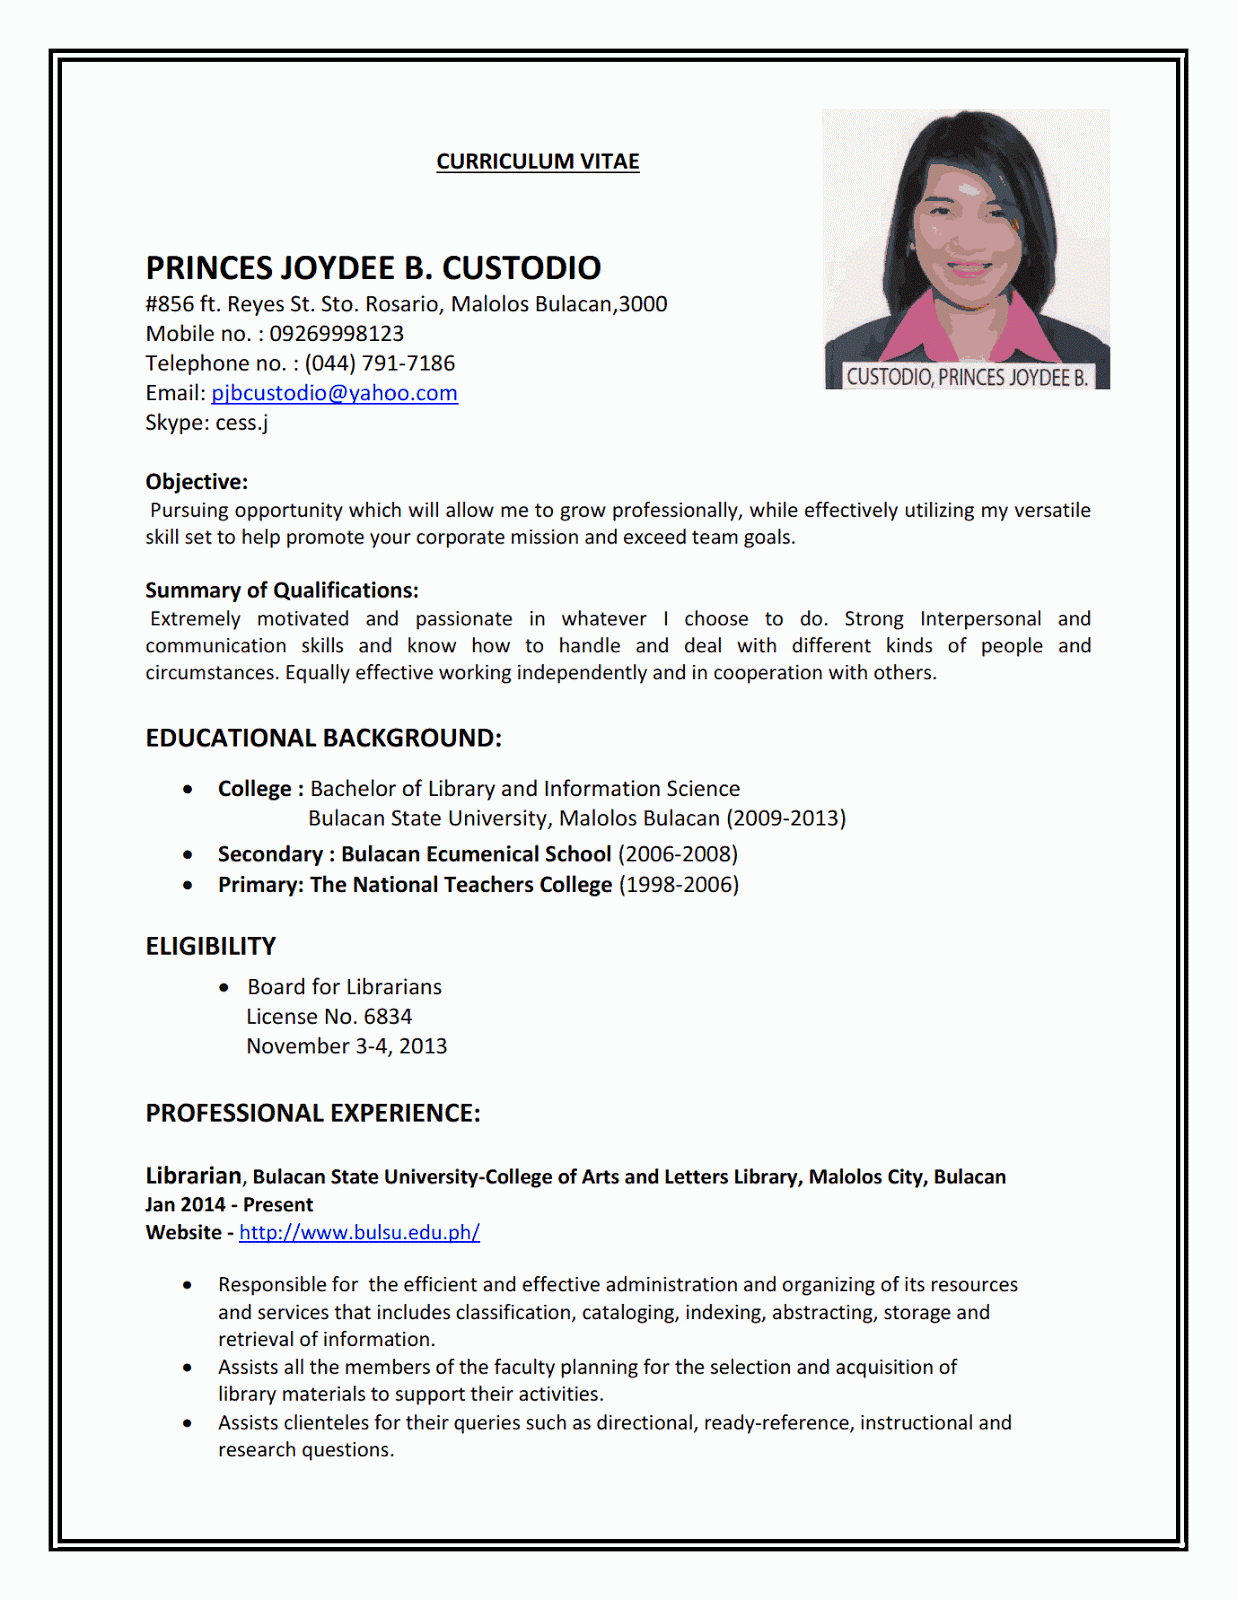 Worksource resume examples